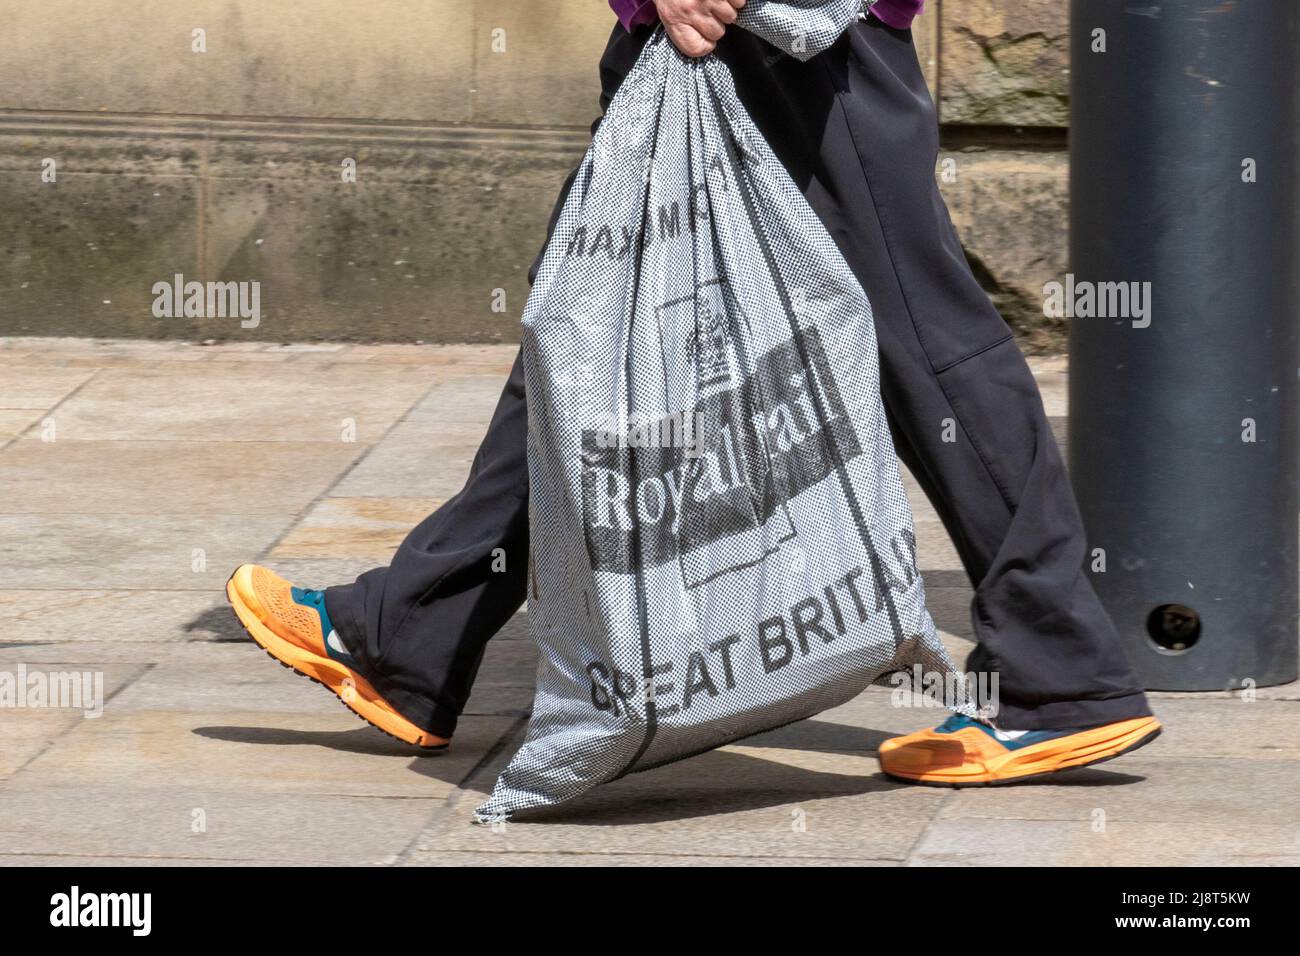 Great Britain Royal Mail delivery parcel sack, being carried by mail man, in Fishergate Preston, UK Stock Photo